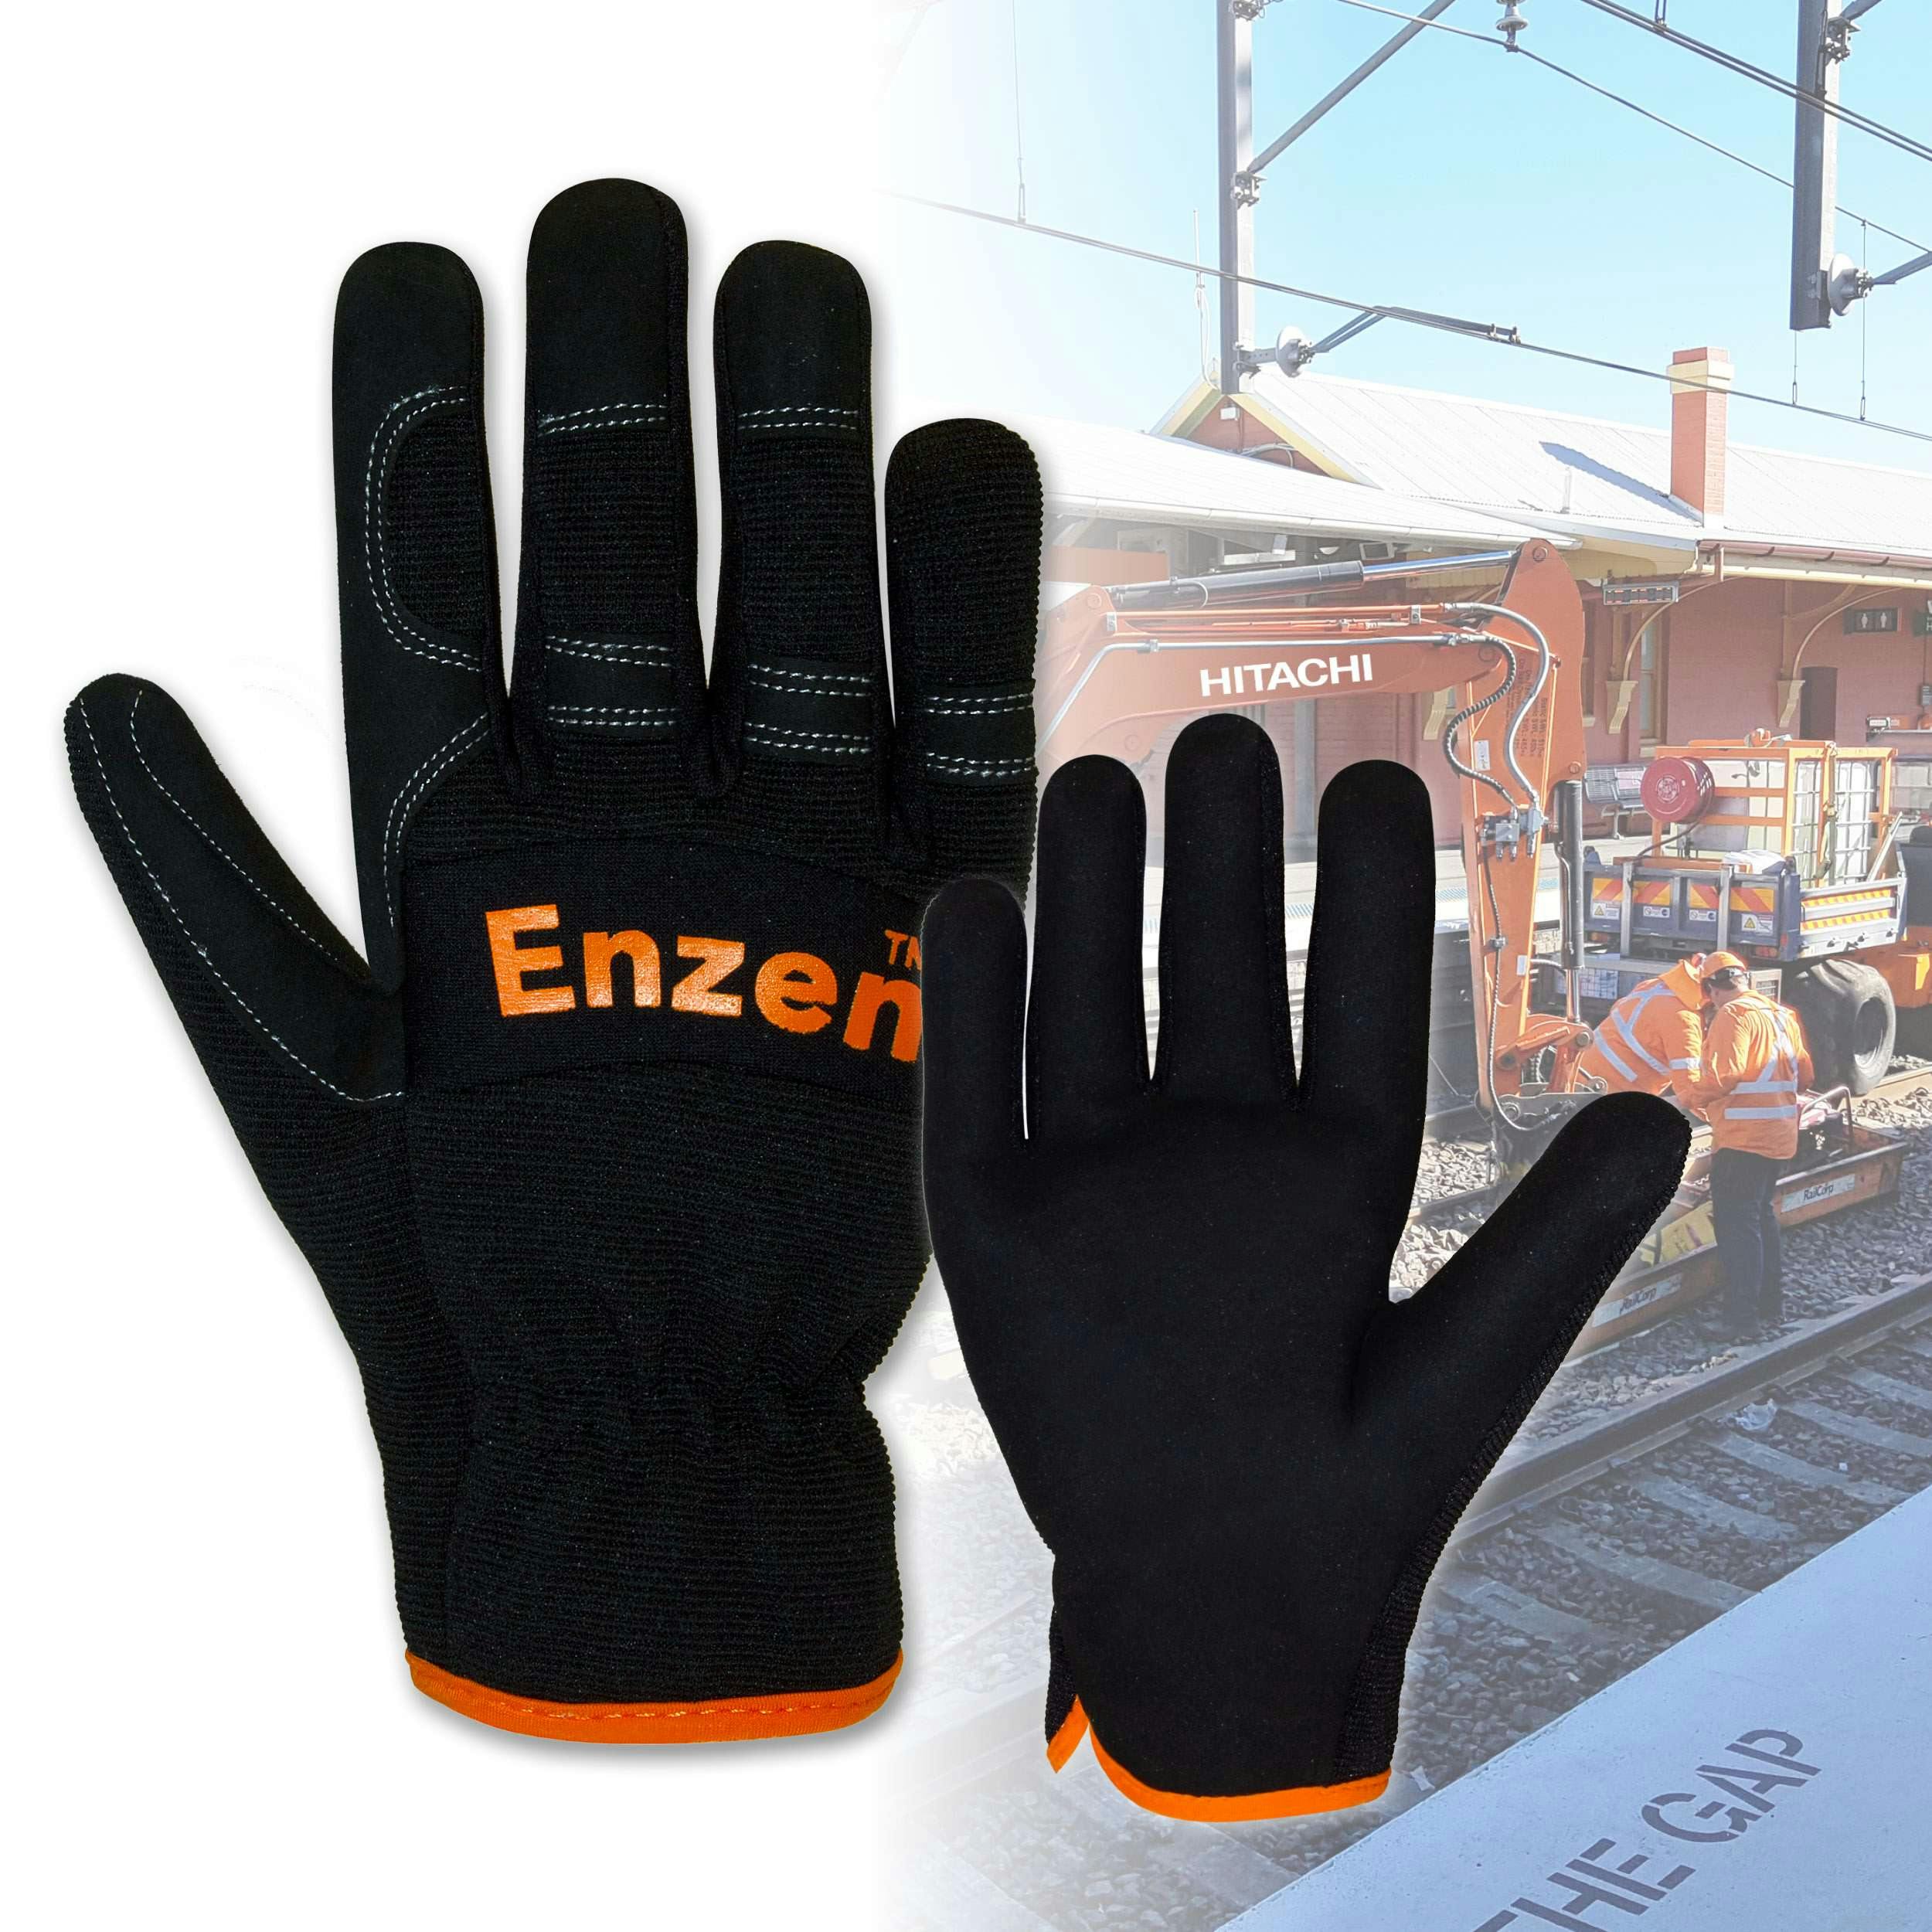 Bastion Enzen Synthetic Leather Riggers Gloves